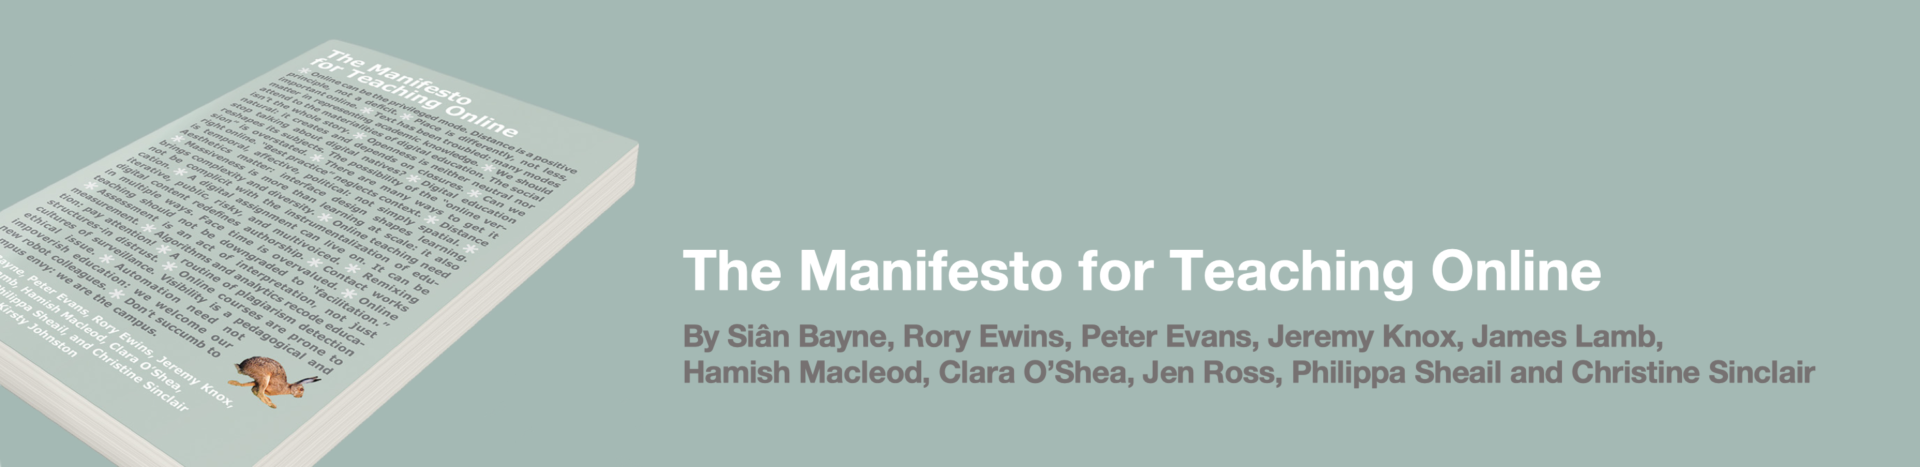 Watch now: Manifesto for Teaching Online book launch events